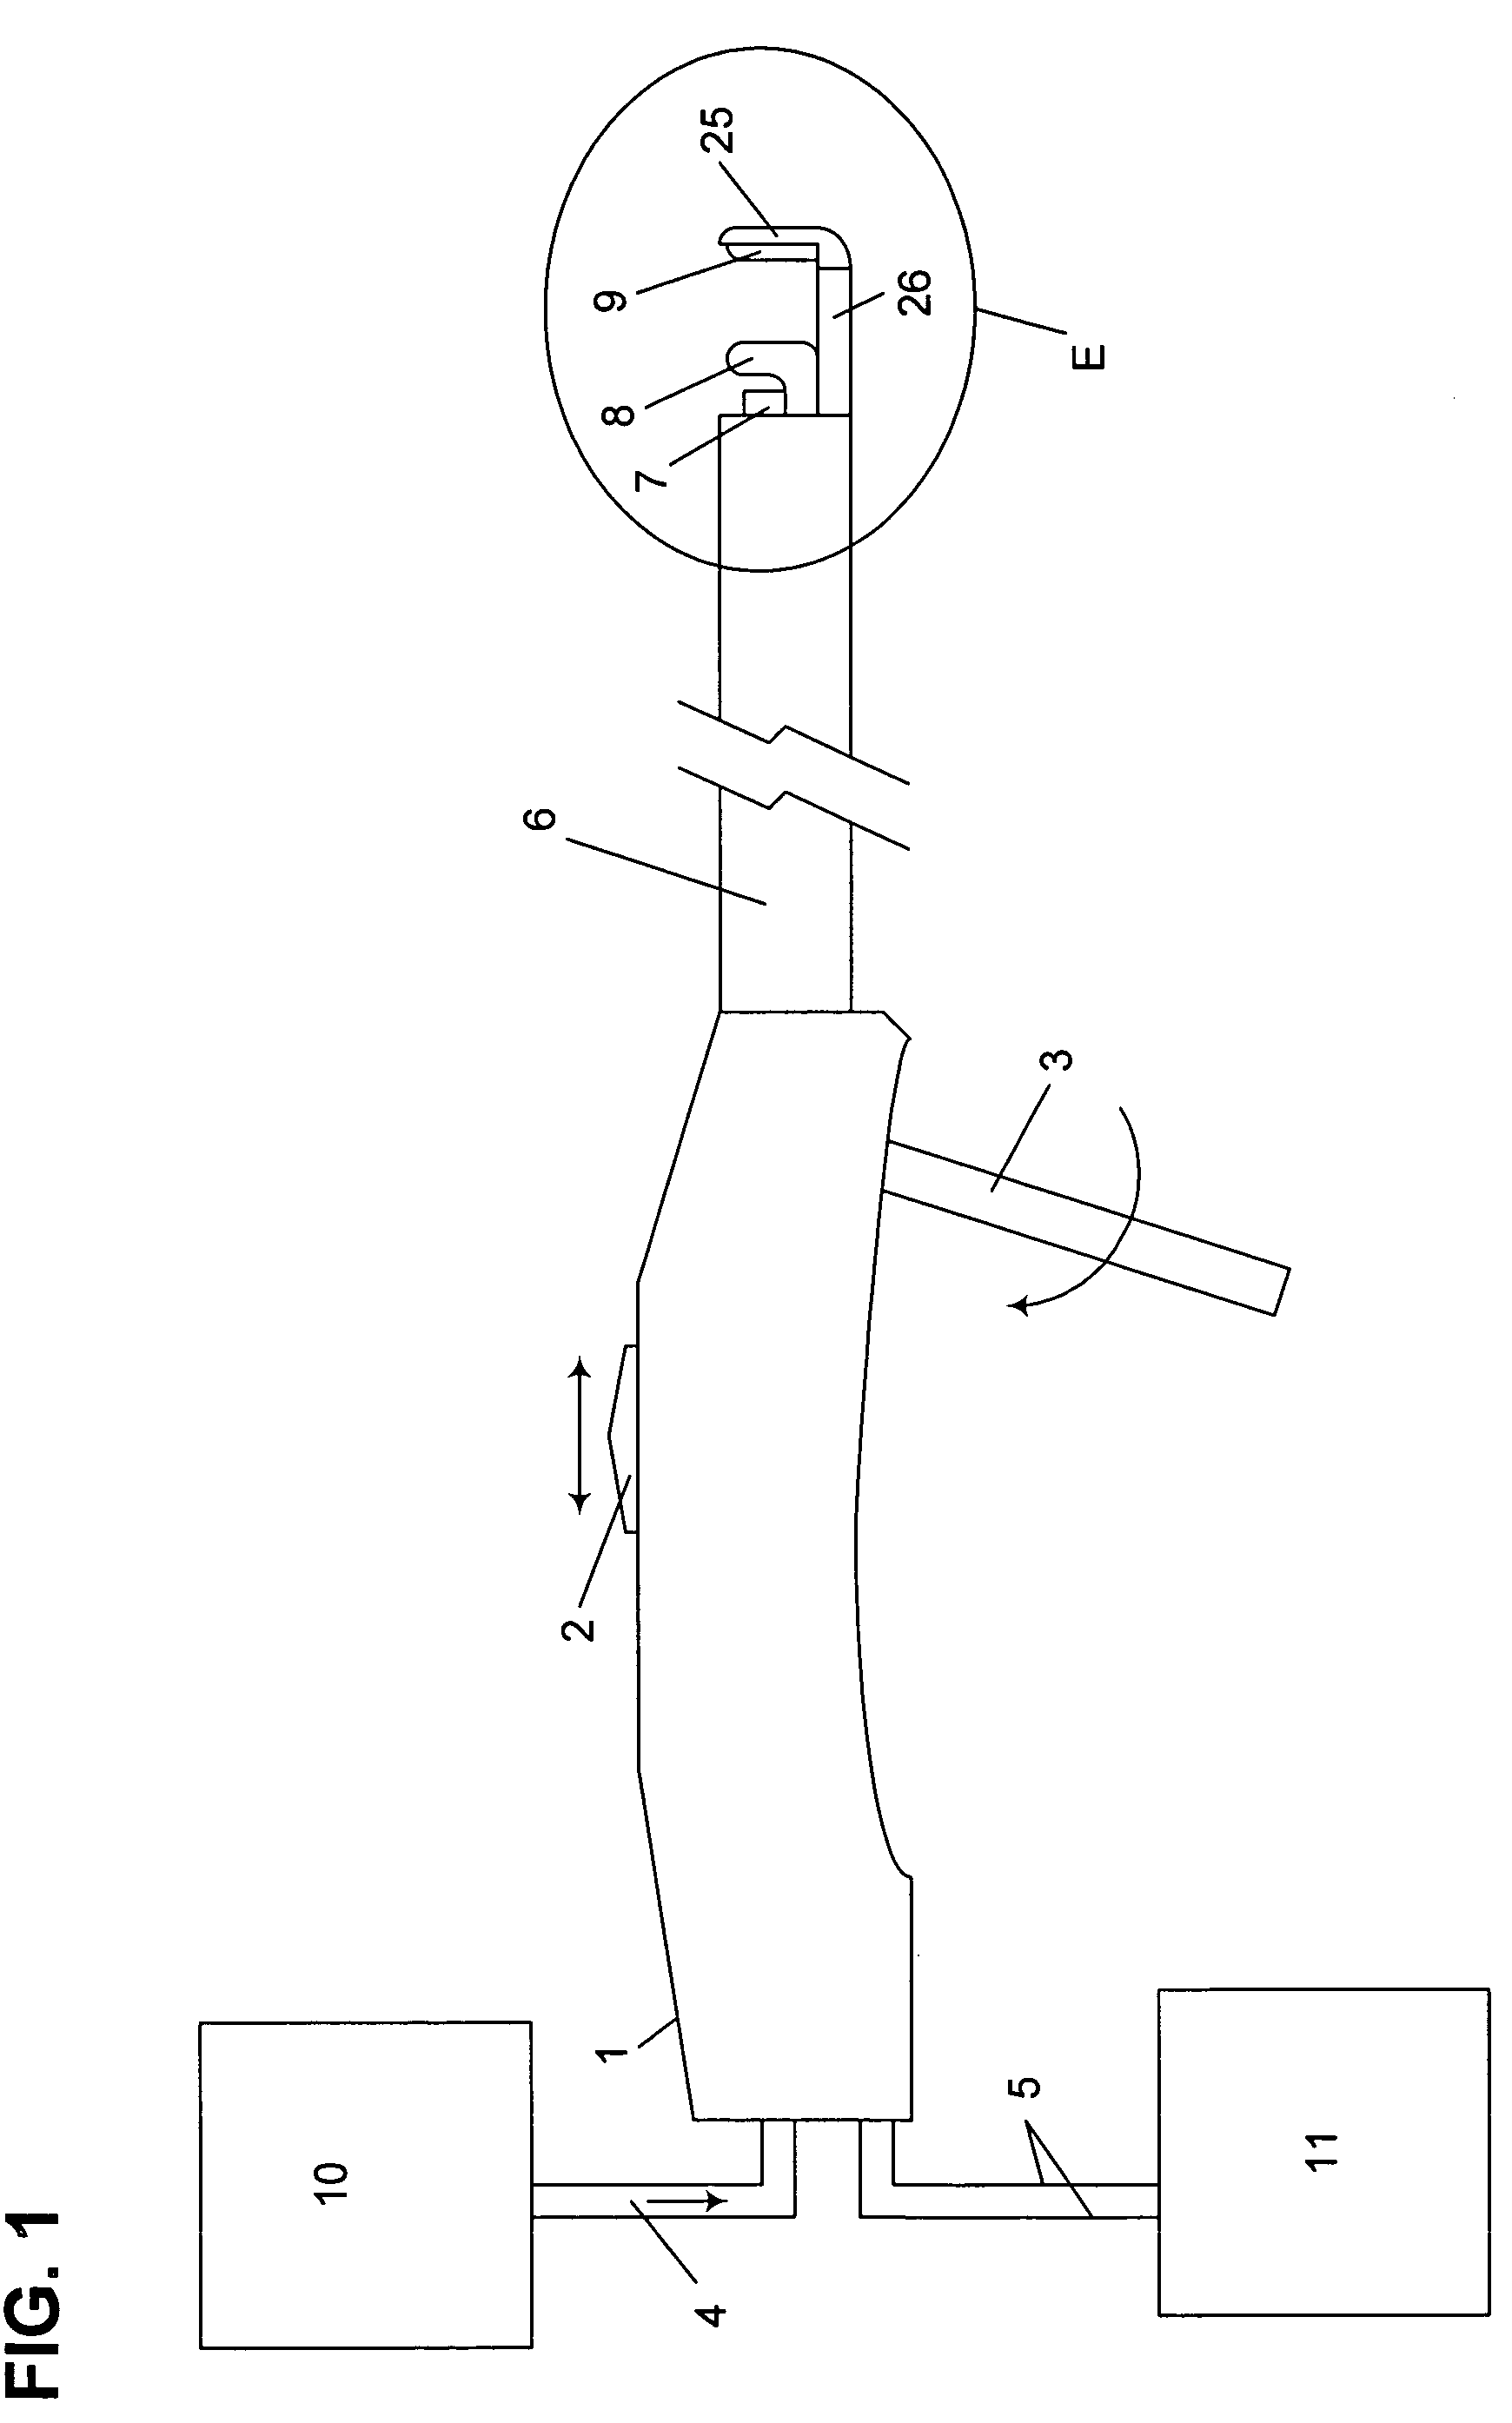 Fluid-assisted medical device